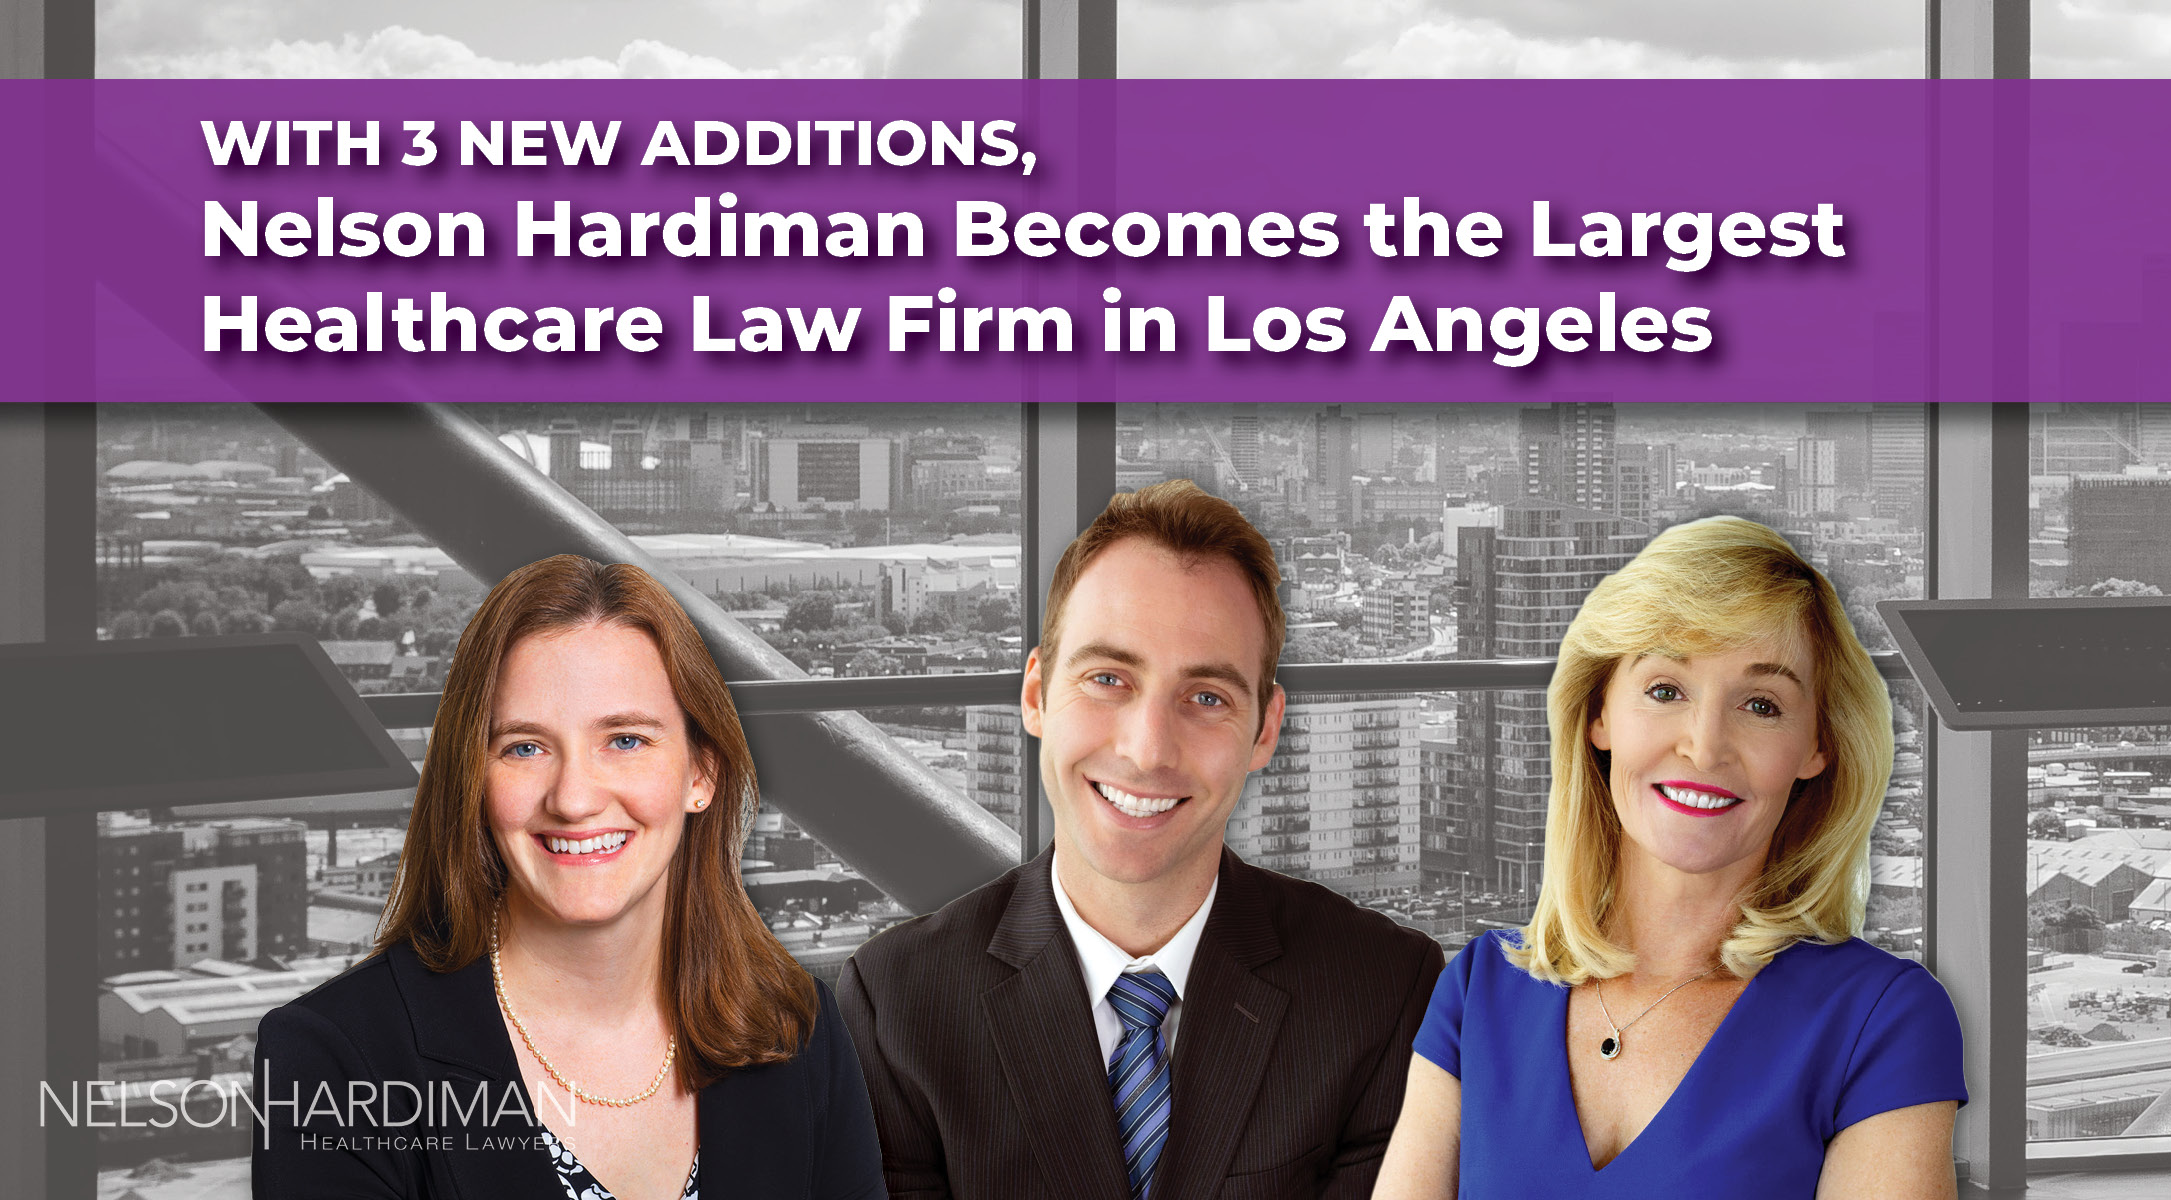 With 3 New Additions, Nelson Hardiman Becomes the Largest Healthcare Law Firm in Los Angeles